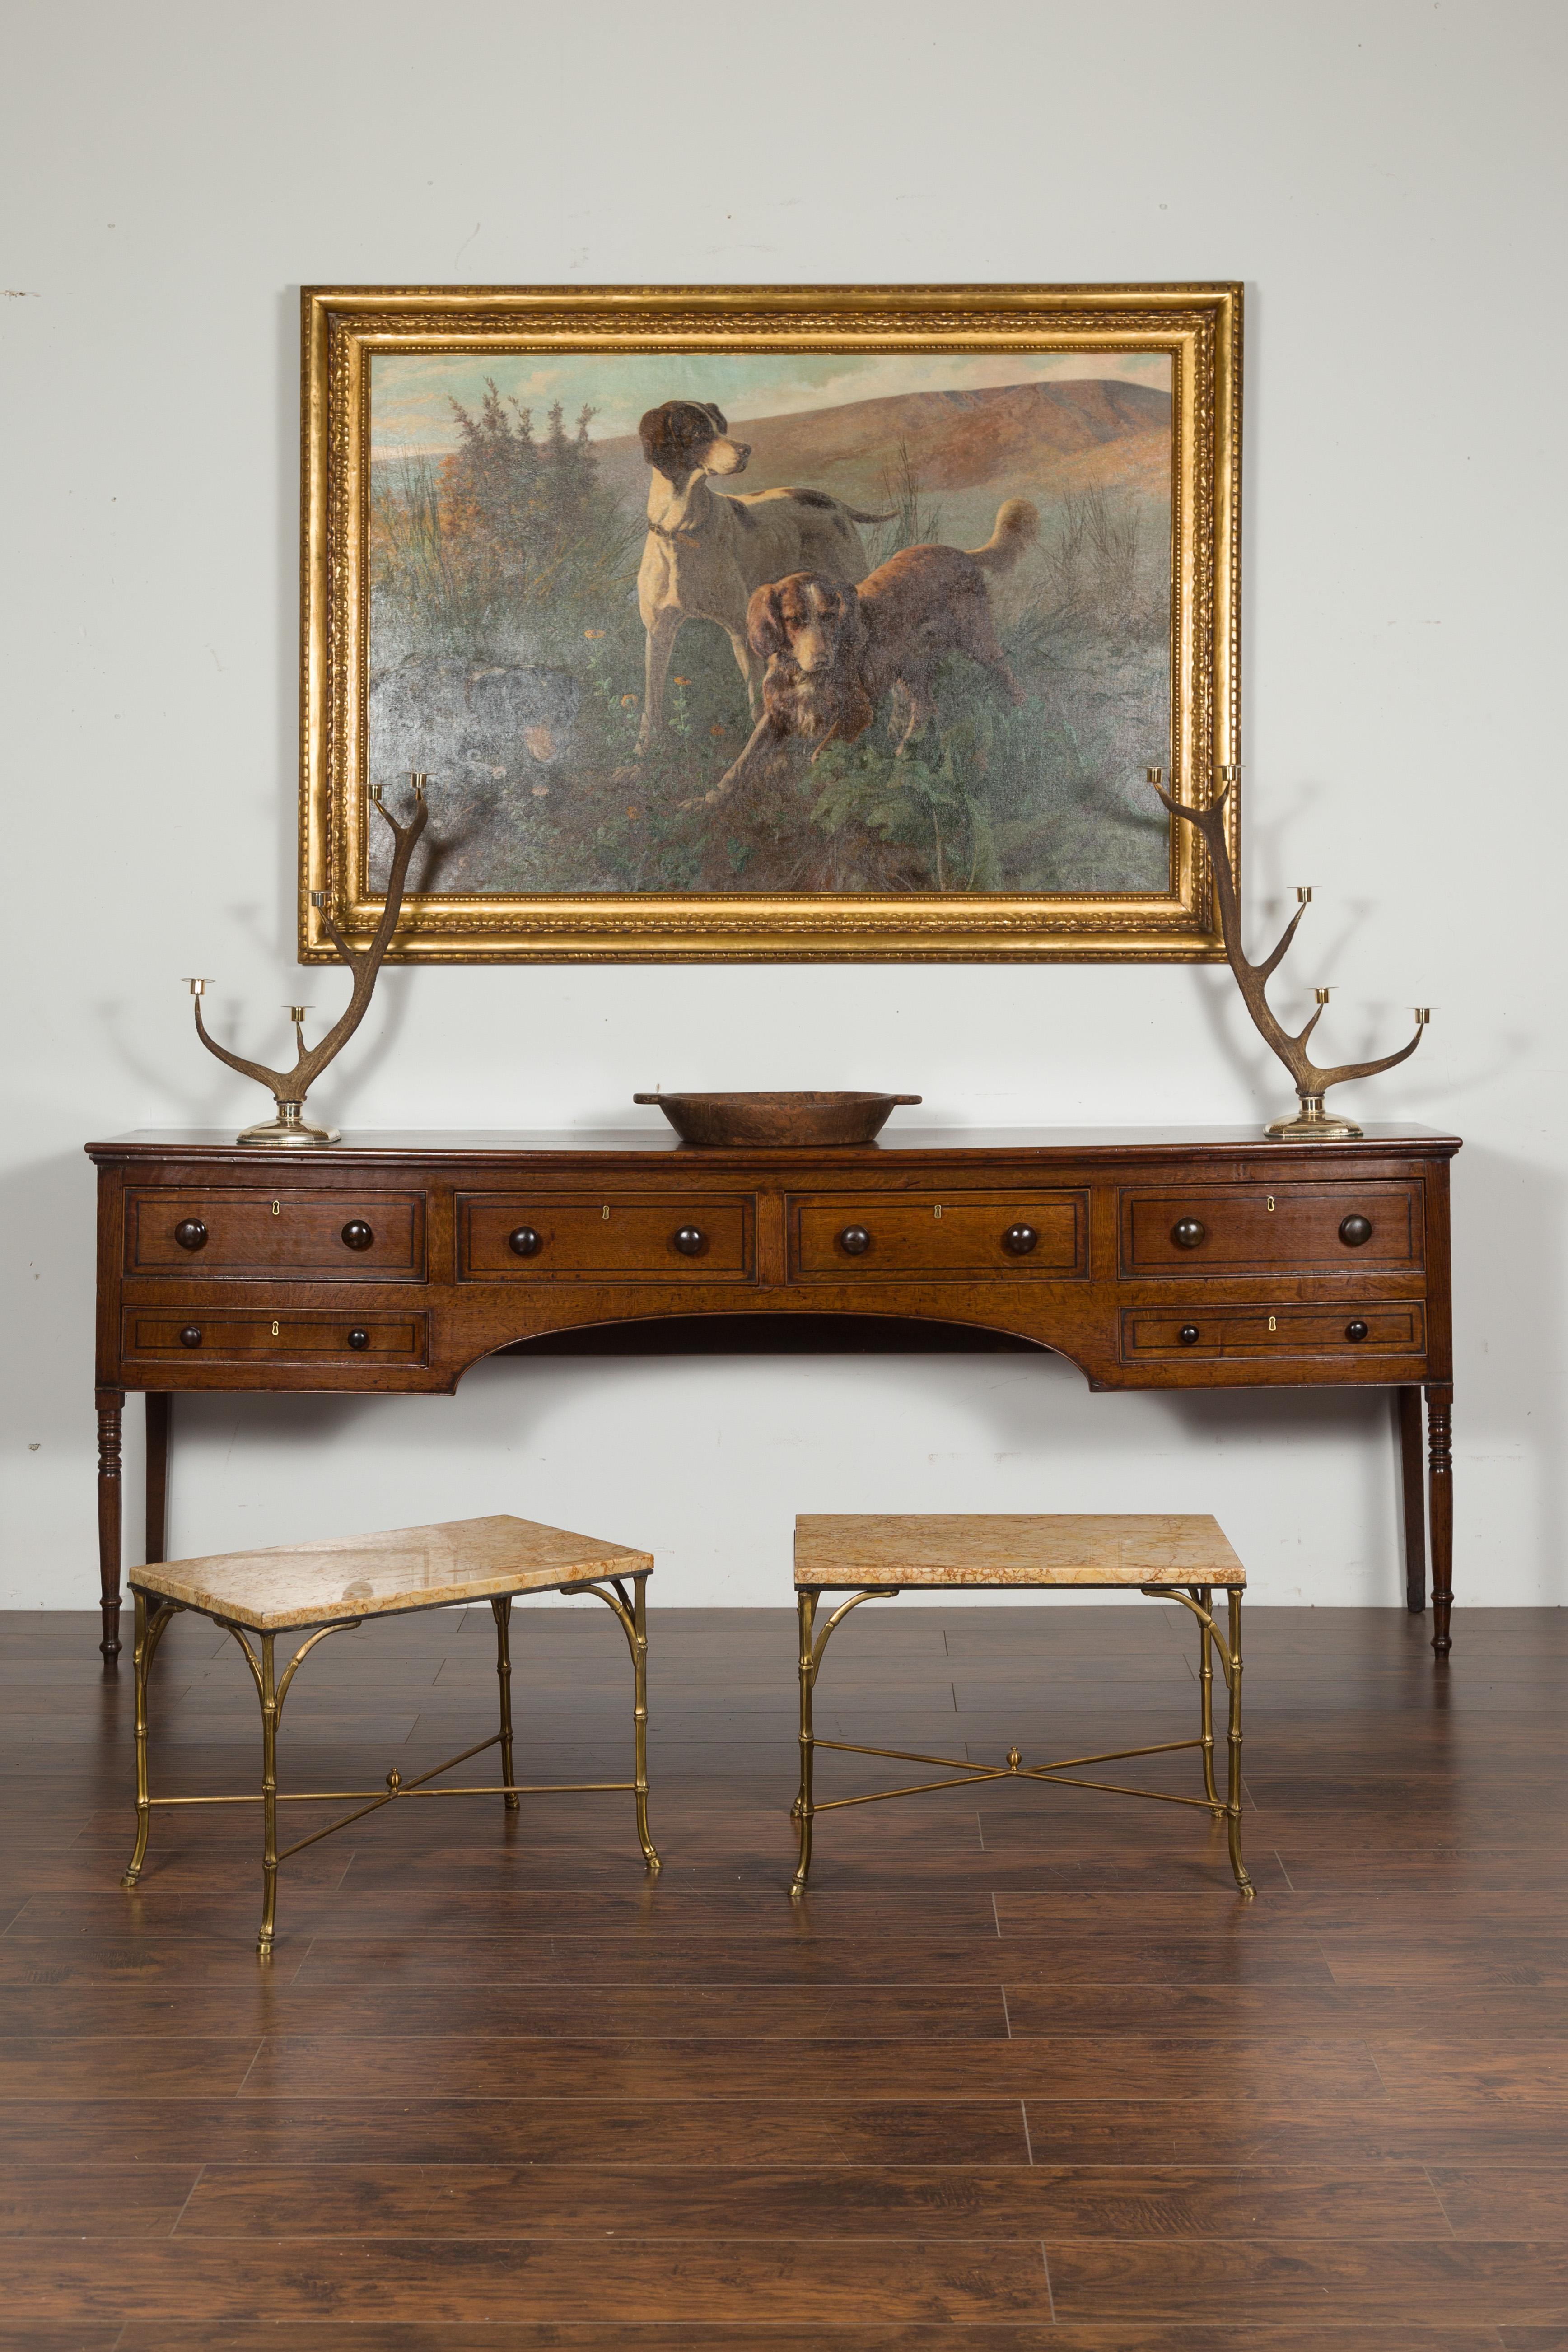 A pair of vintage European bronze faux-bamboo low side tables from the mid-20th century, with marble tops. Created during the midcentury period, each of this pair of bronze side tables features a rectangular marble top sitting above four faux-bamboo